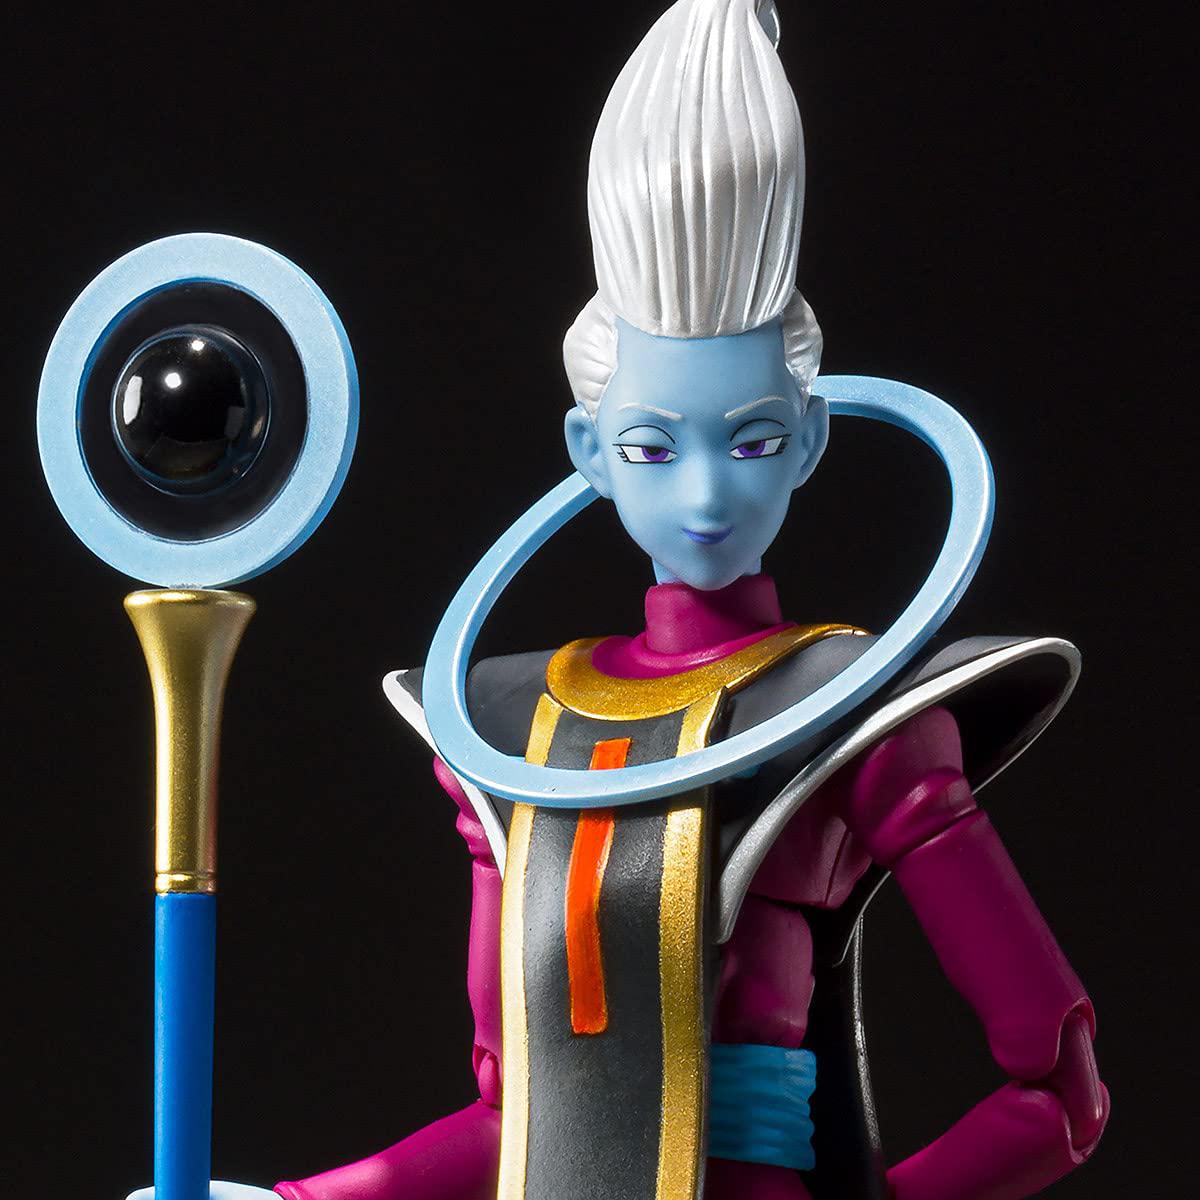 Bandai Toys bandai tamashii nations dragon ball super s.h.figuarts whis sdcc 2021 event exclusive color edition-